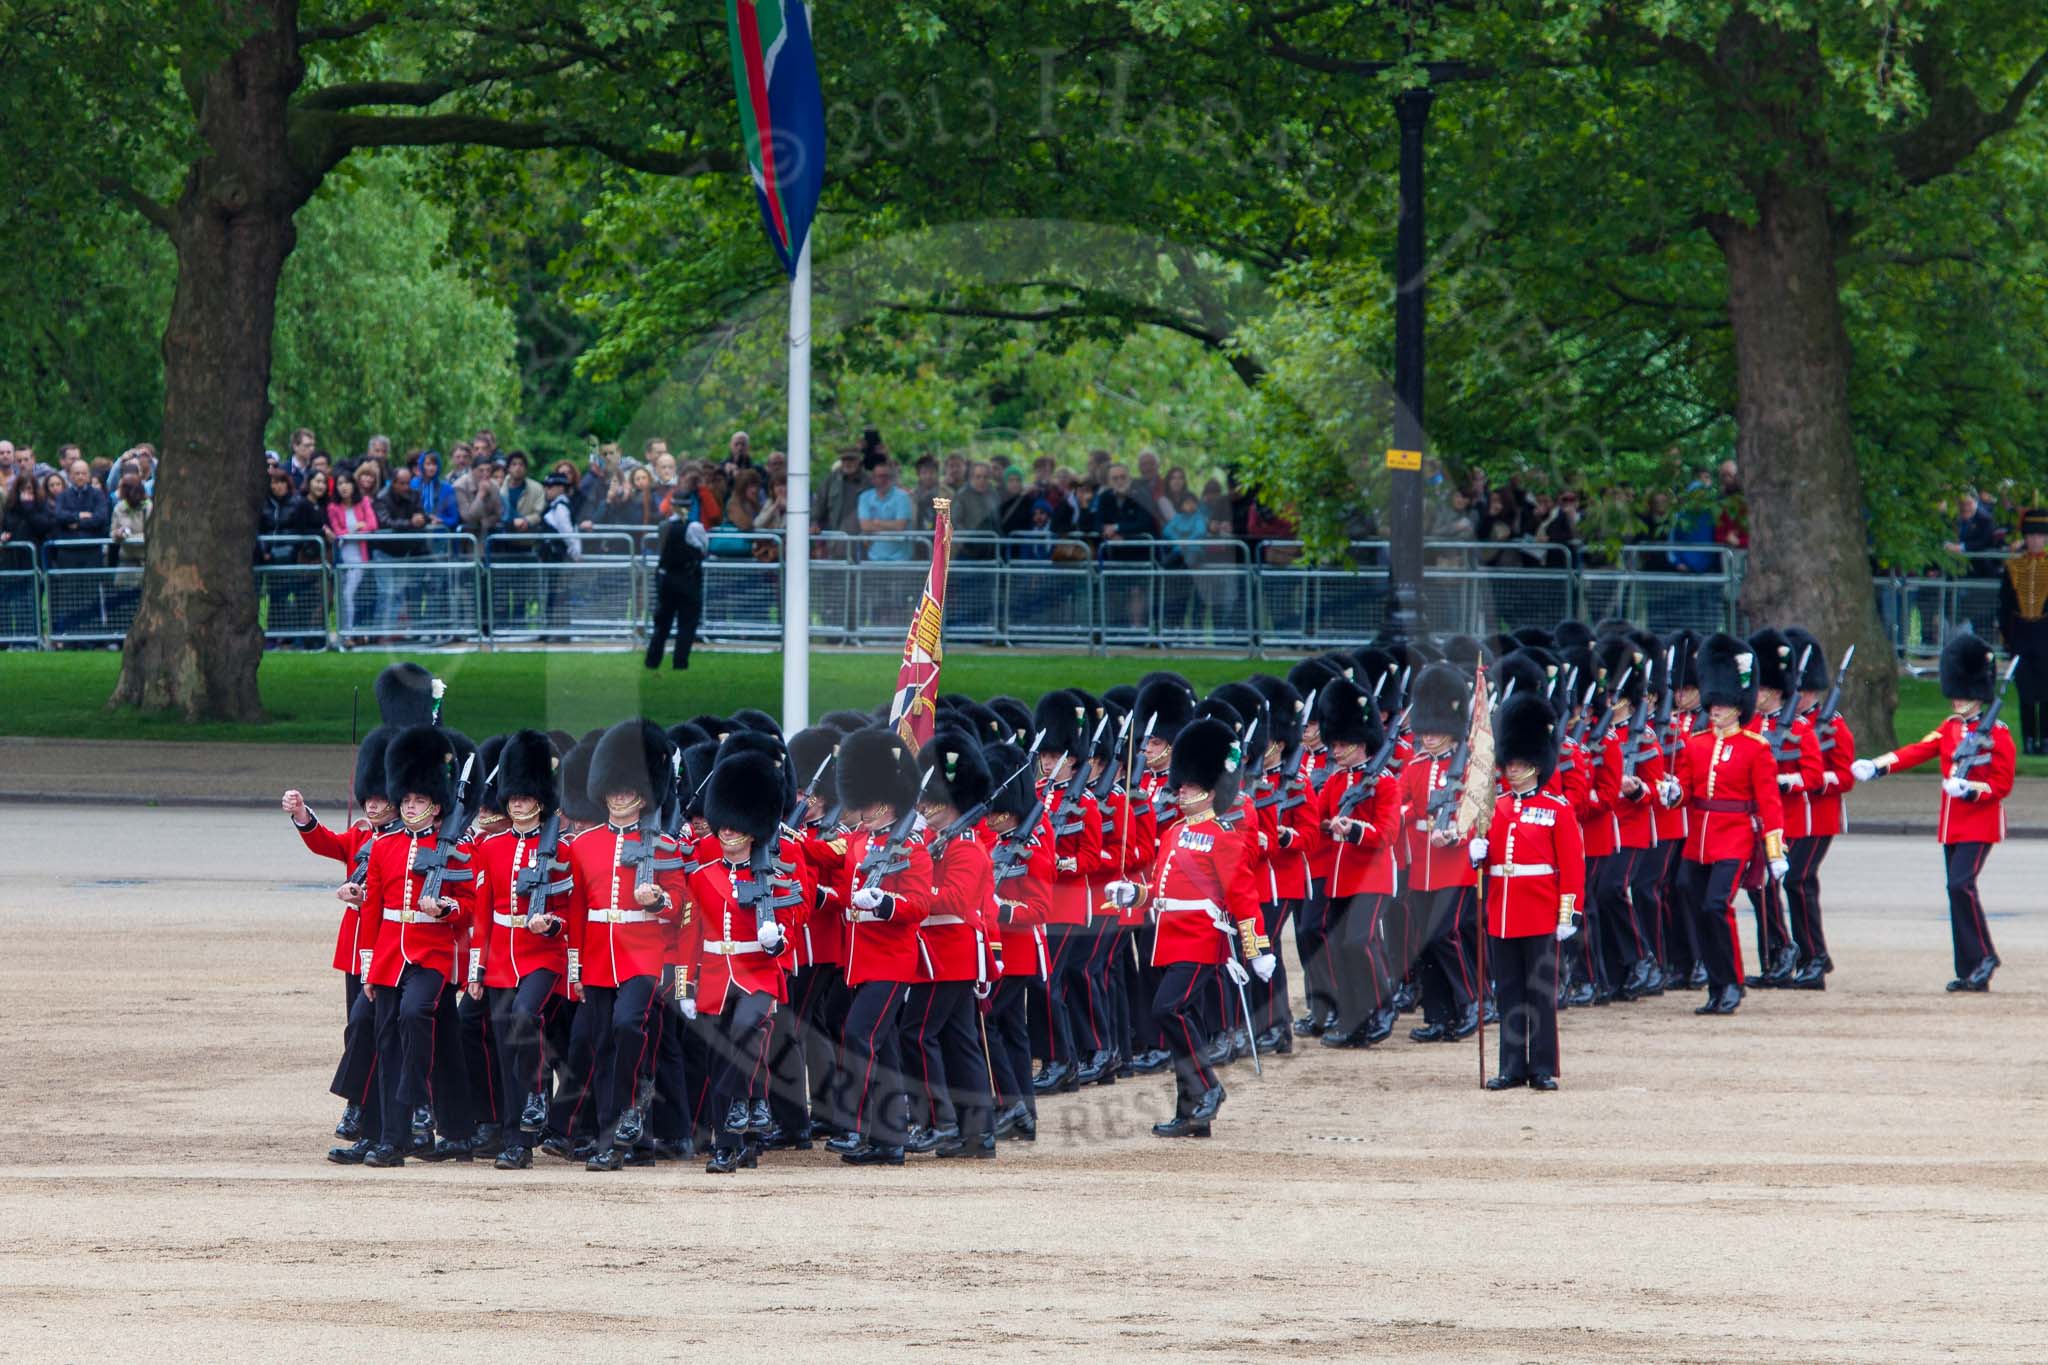 Major General's Review 2013: The March Past in Quick Time - the guards perform another ninety-degree-turn..
Horse Guards Parade, Westminster,
London SW1,

United Kingdom,
on 01 June 2013 at 11:40, image #529